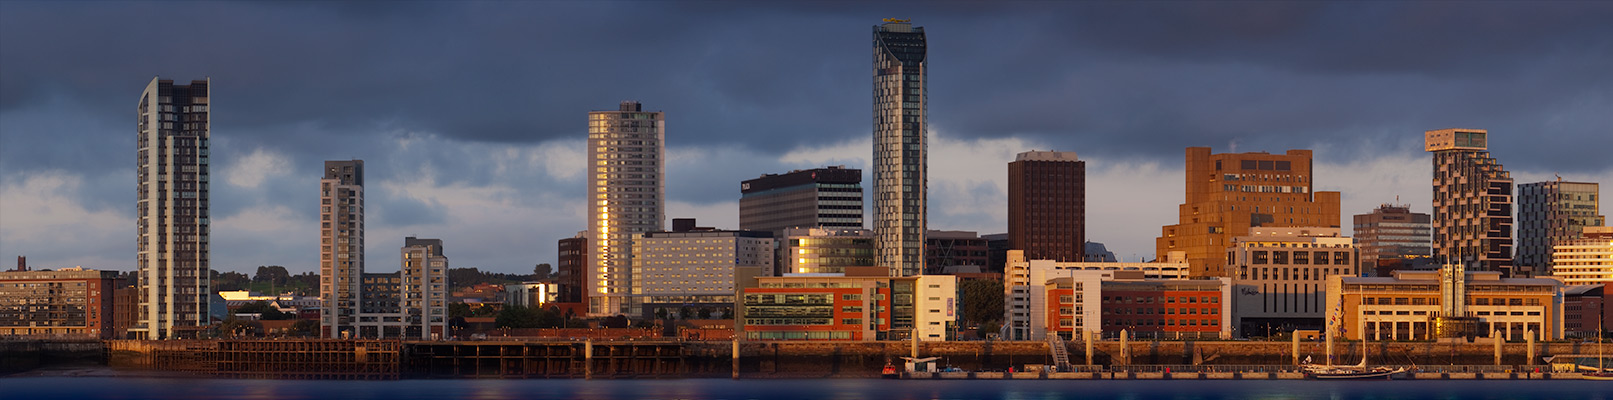 Liverpool Night and Day. Fine Art Landscape Photography by Gary Waidson © All rights reserved